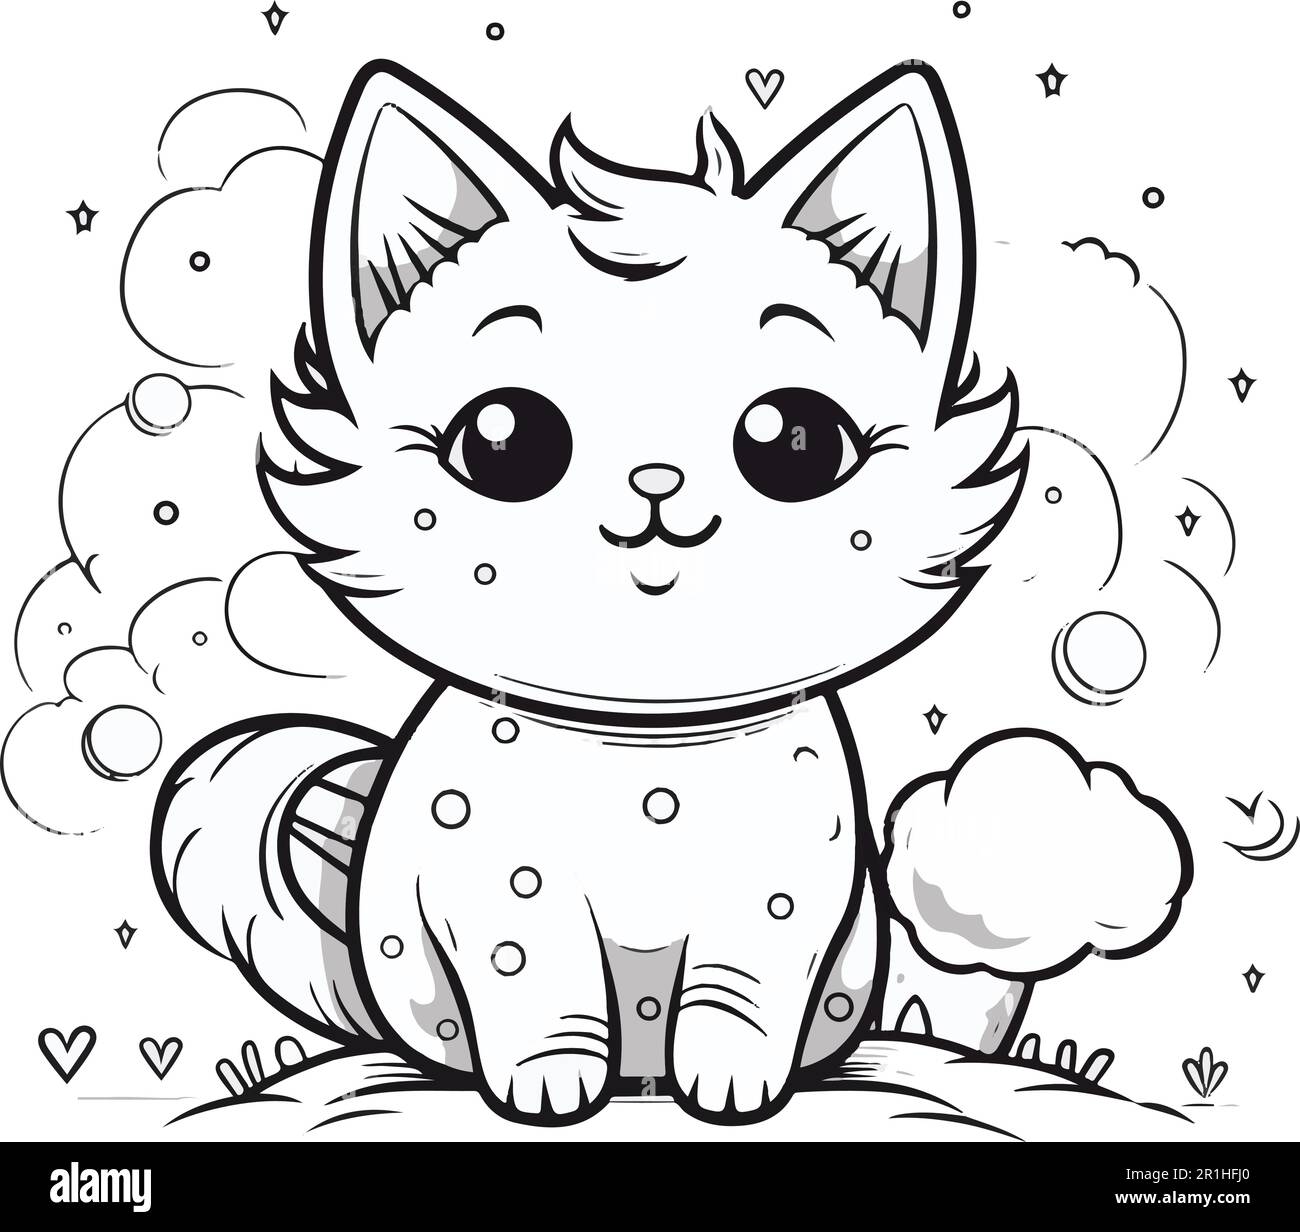 Kitten Coloring Pages Vector Art, Icons, and Graphics for Free